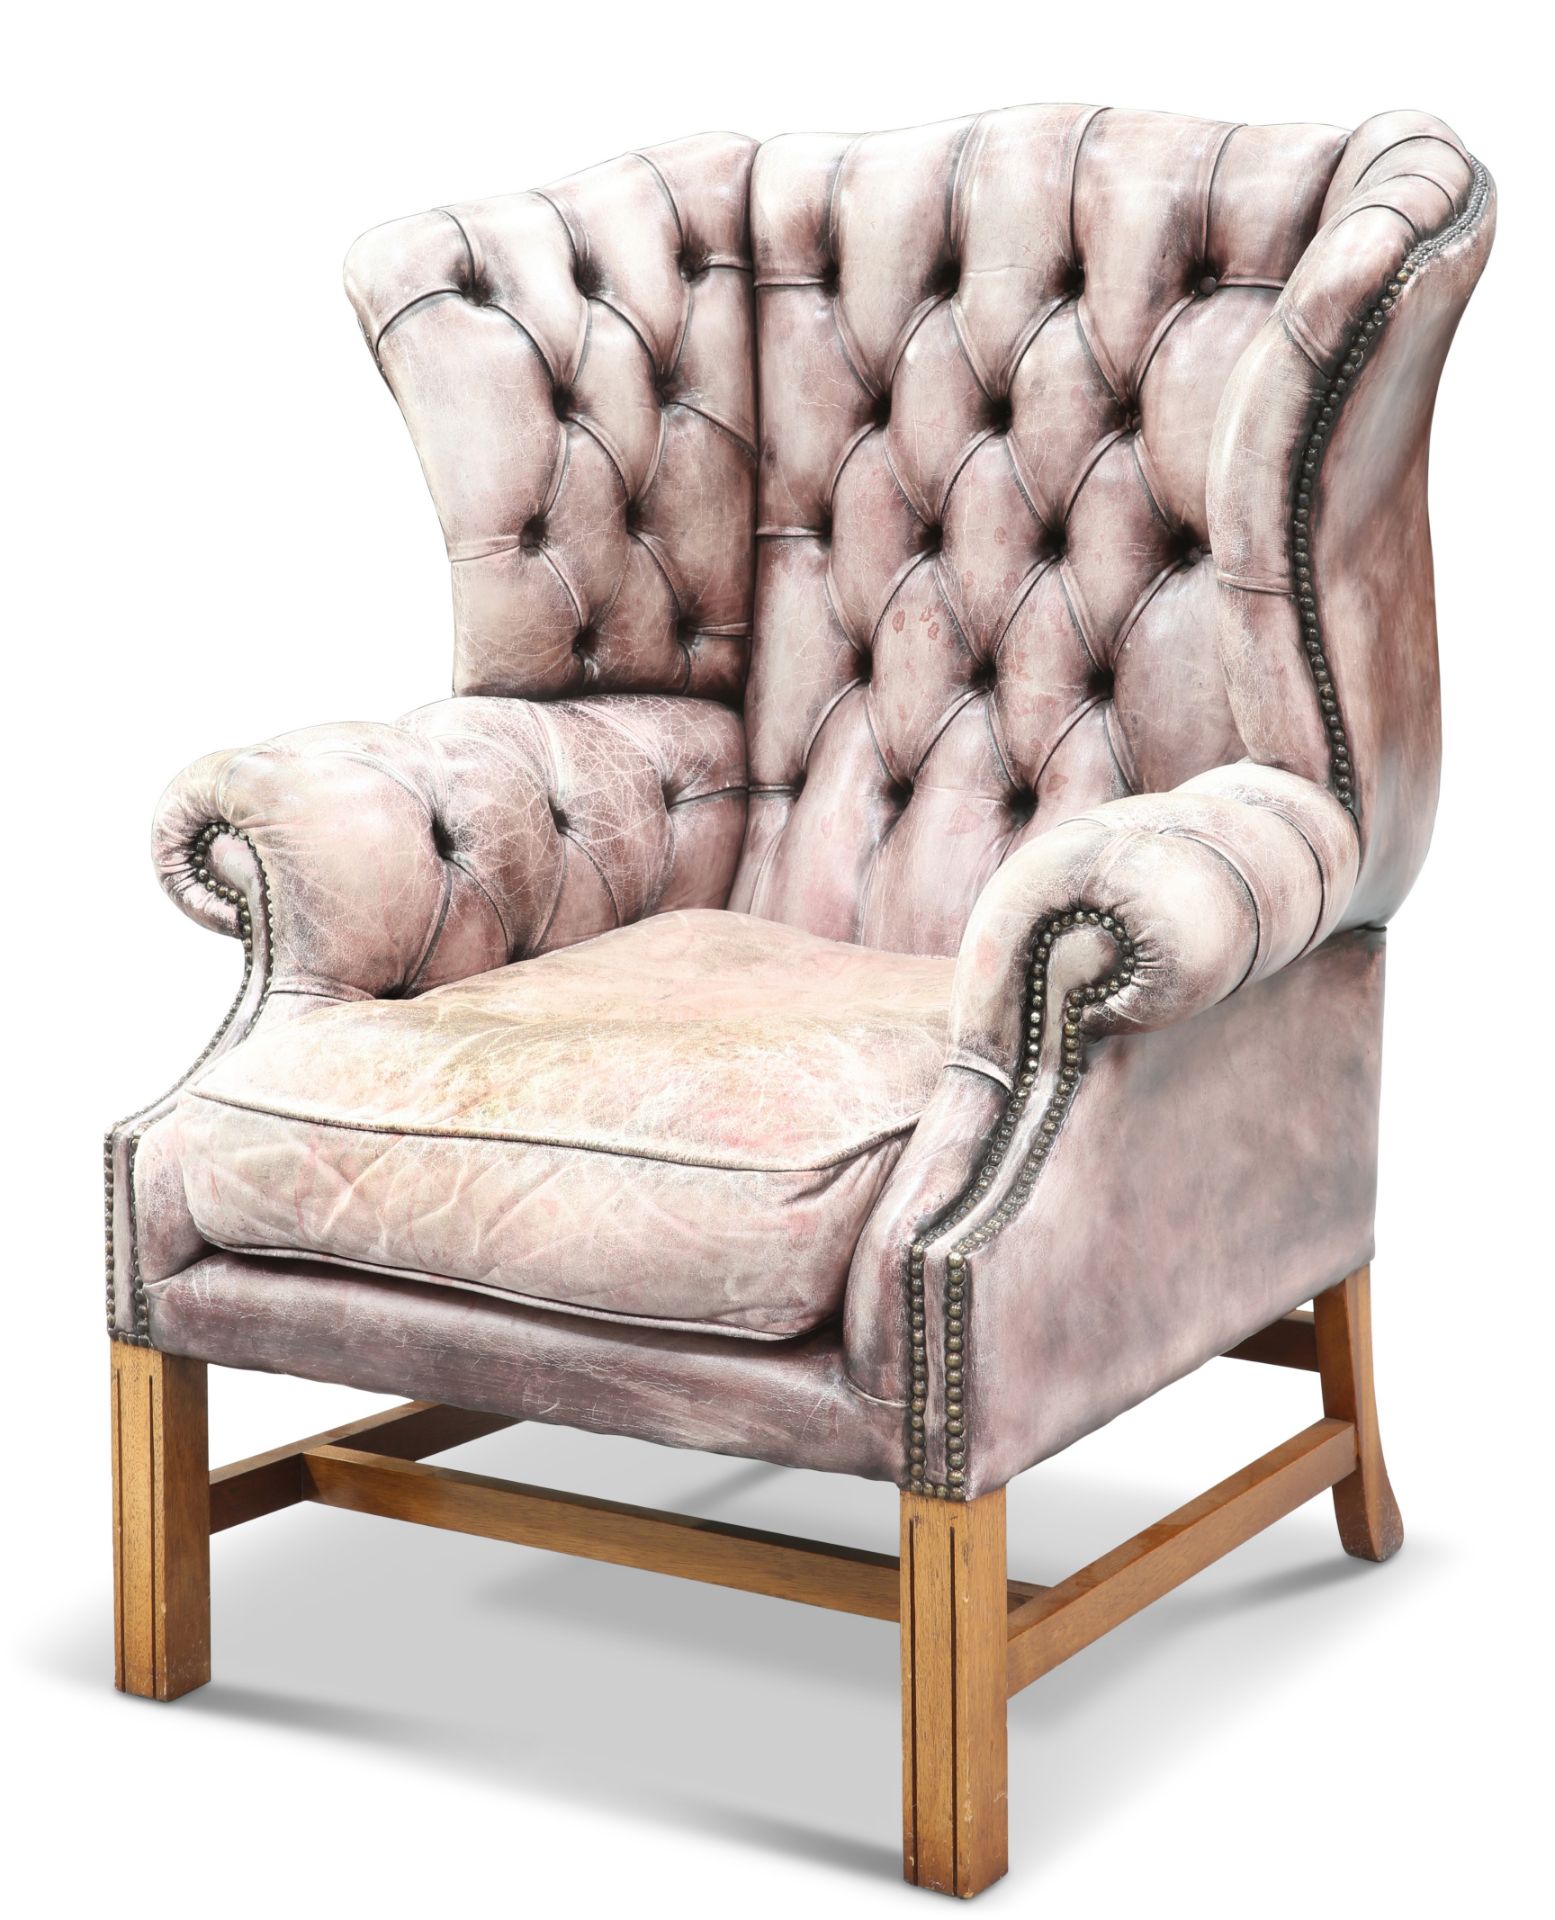 A GEORGIAN-STYLE LEATHER UPHOLSTERED WING-BACK ARMCHAIR